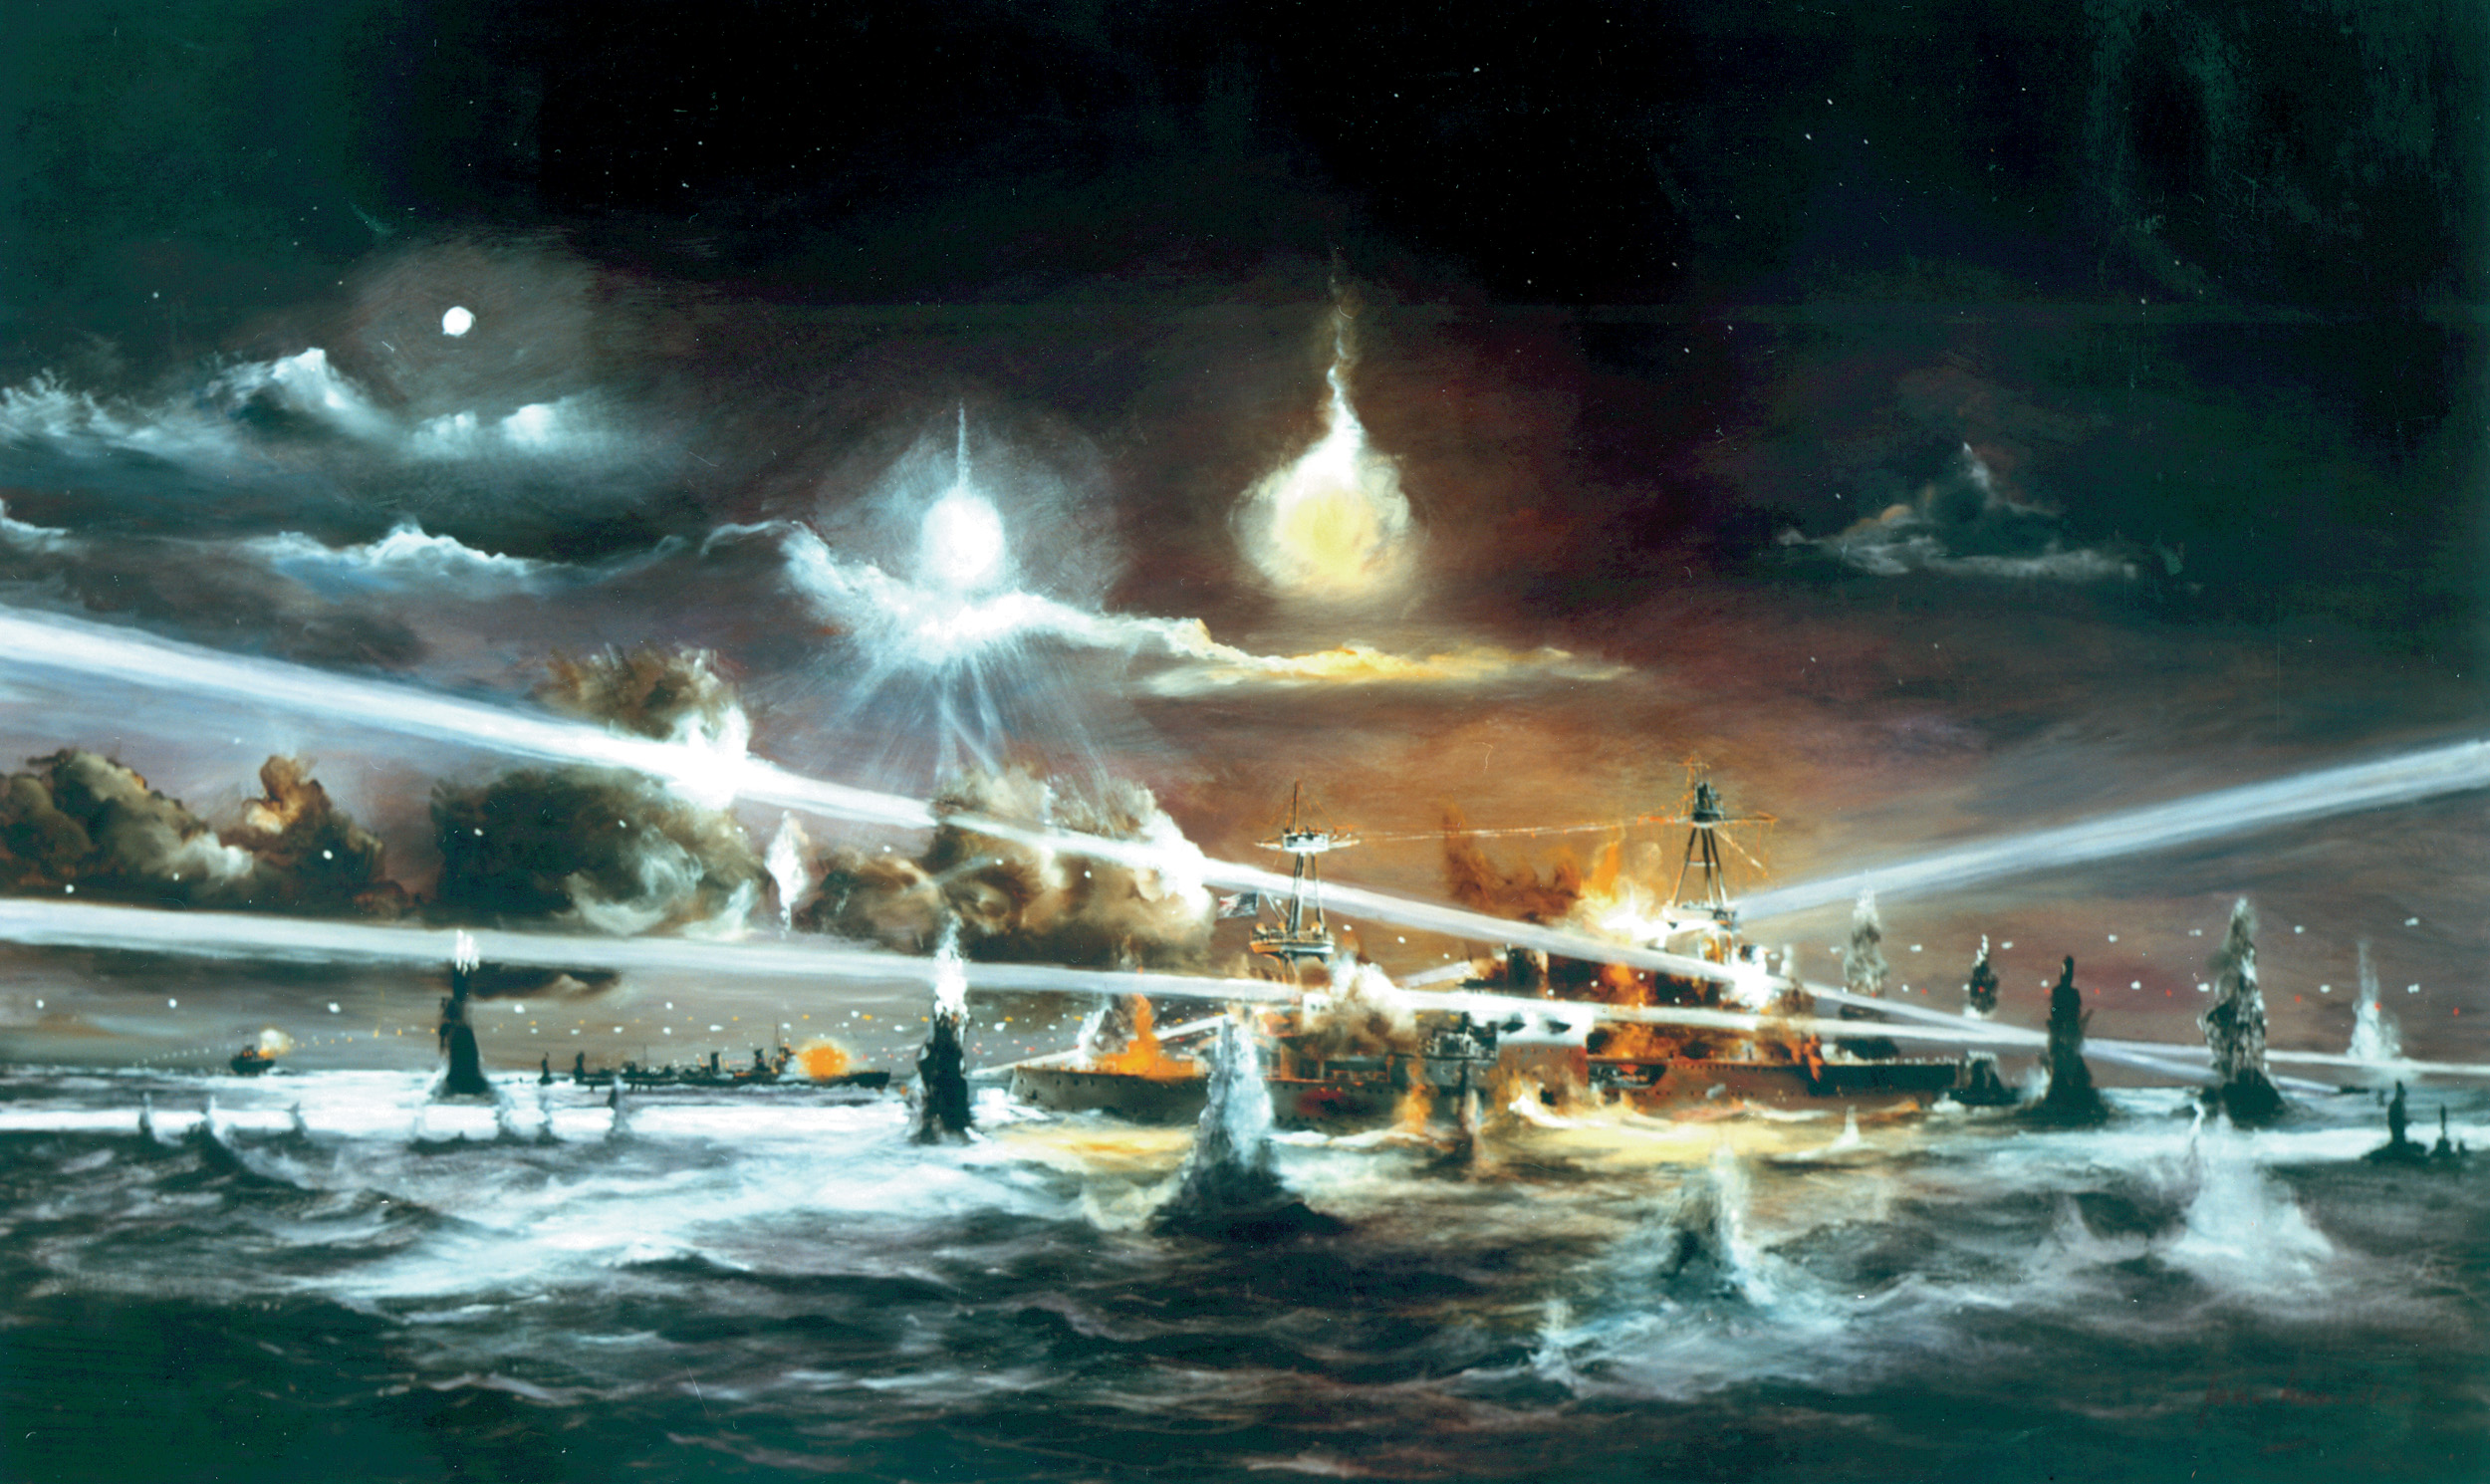 Searchlights and flares stab through the darkness during the night action in Sunda Strait as depicted by artist John Hamilton. Early in the Pacific War, the Japanese were the undisputed masters of the nocturnal naval engagement. However, with the development of sophisticated radar and some hard lessons, the Americans became equally adept.